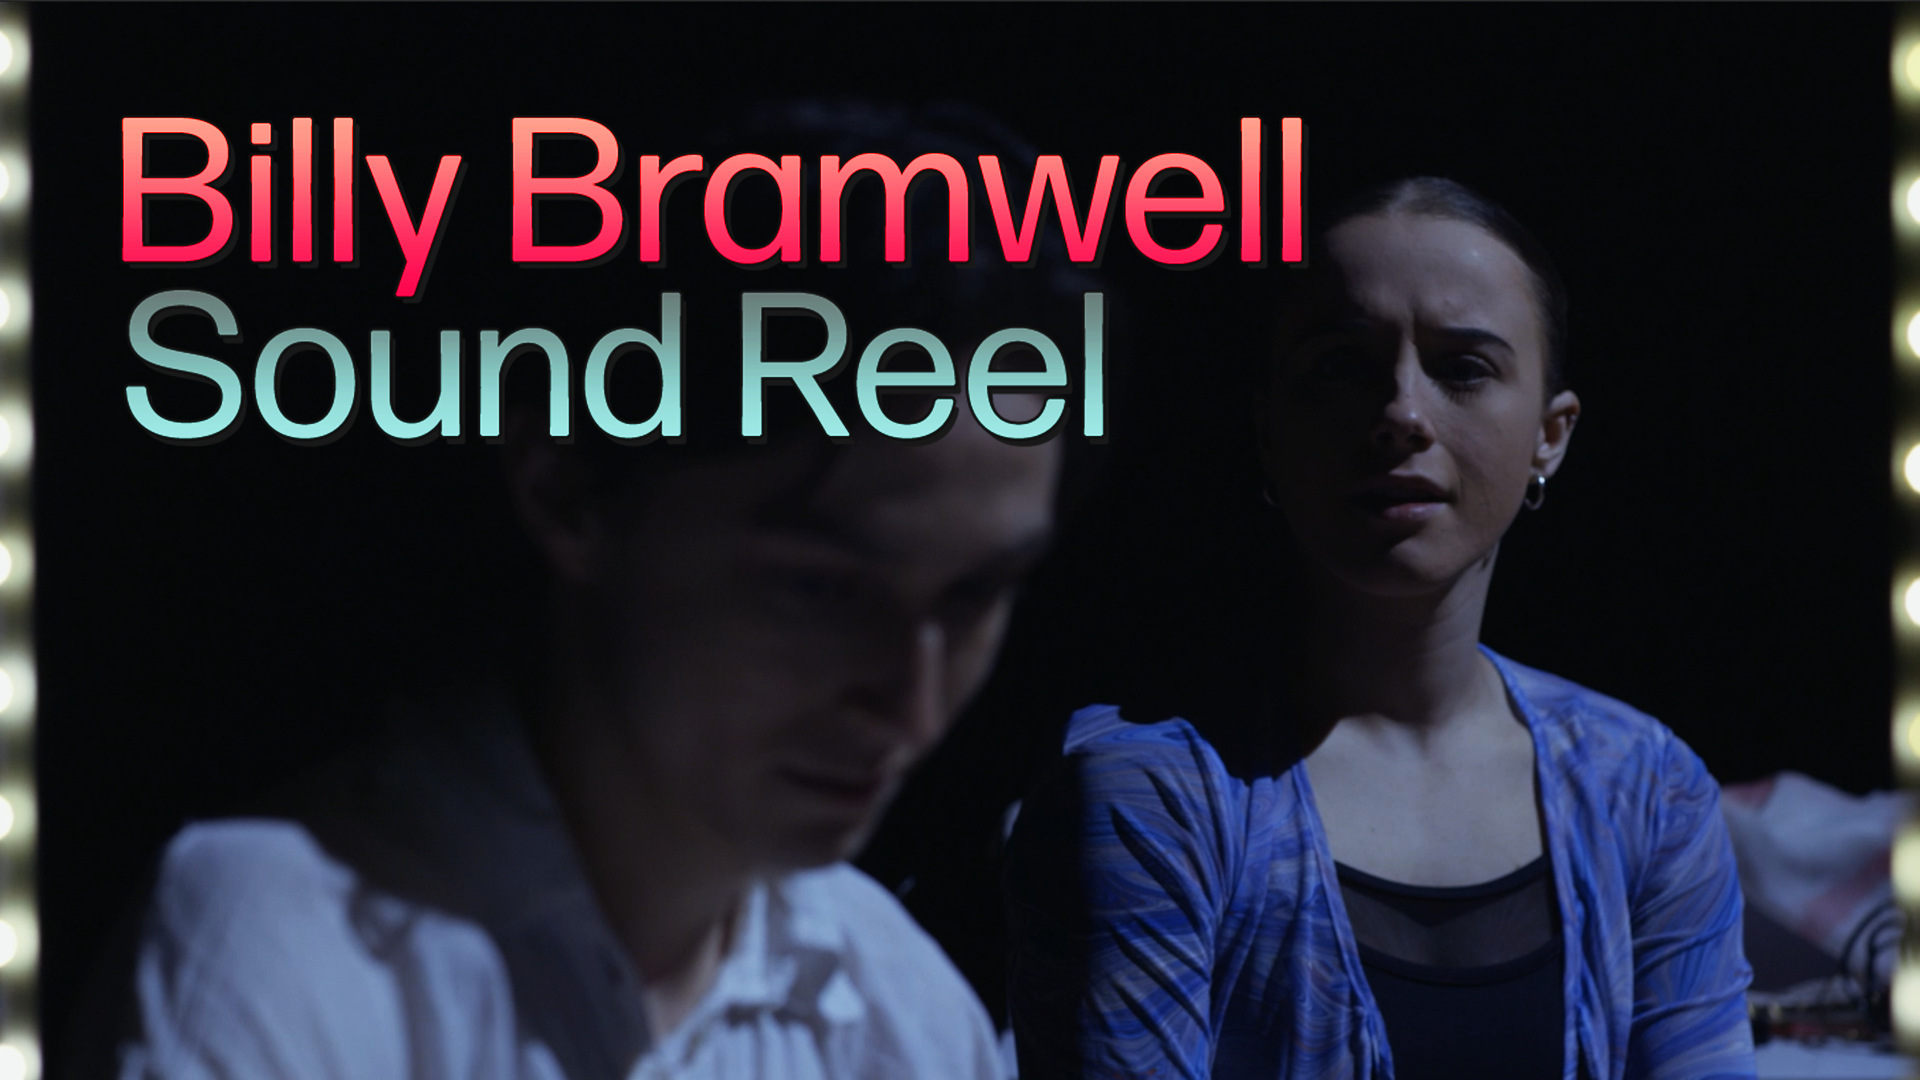 Thumbnail image for Billy Bramwell sound reel